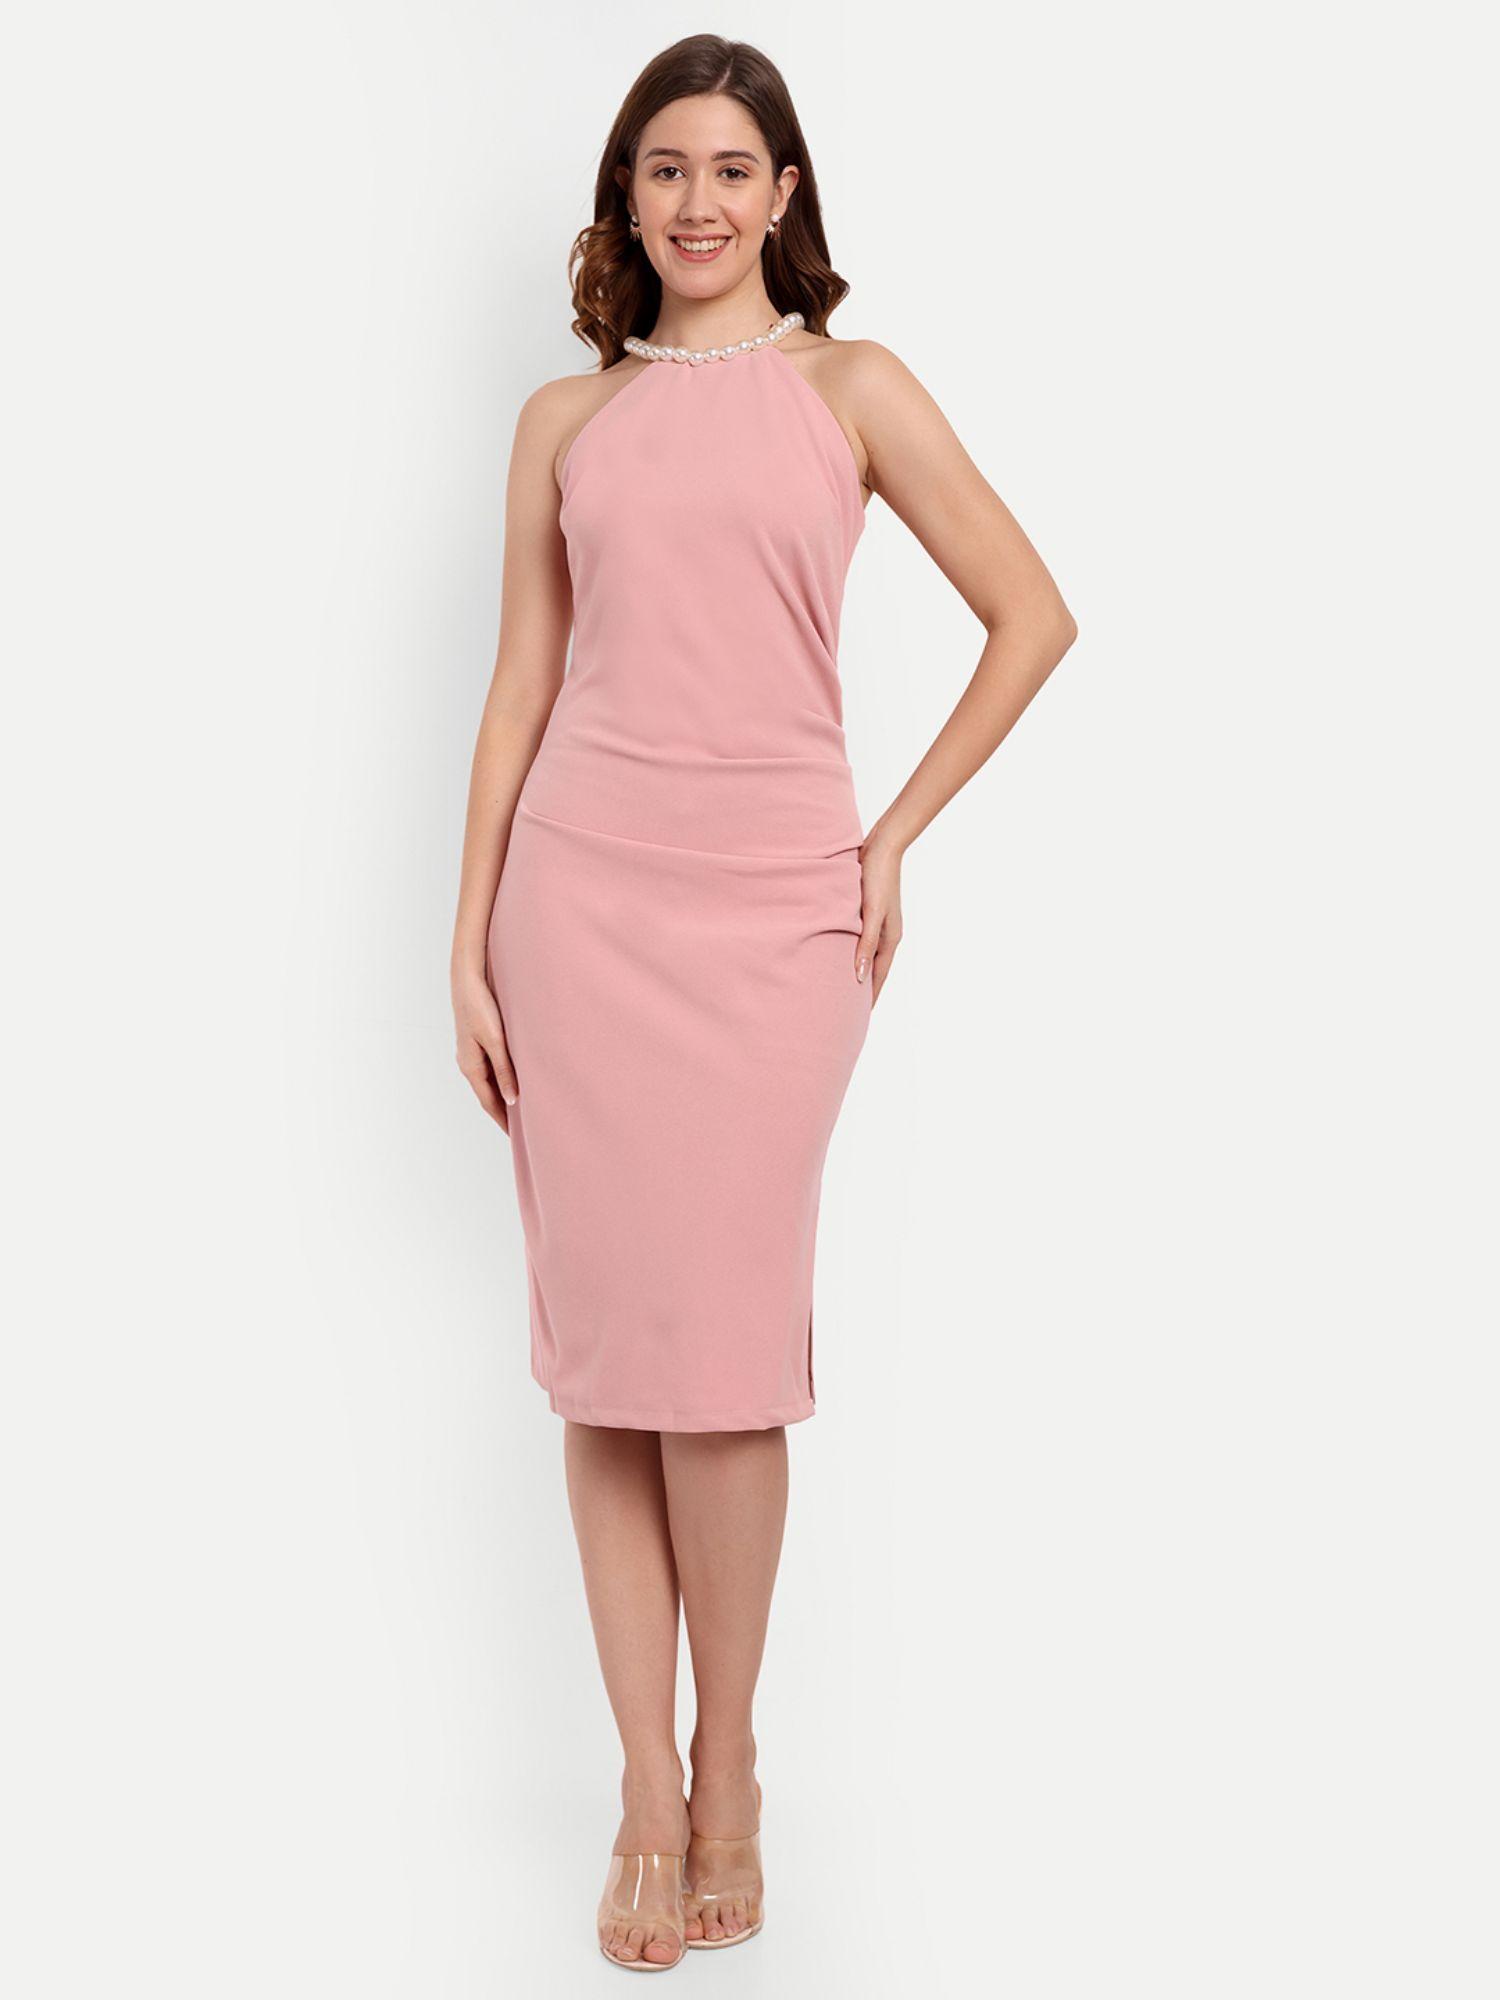 pink bodycon midi dress with a halter neck and draped detailing